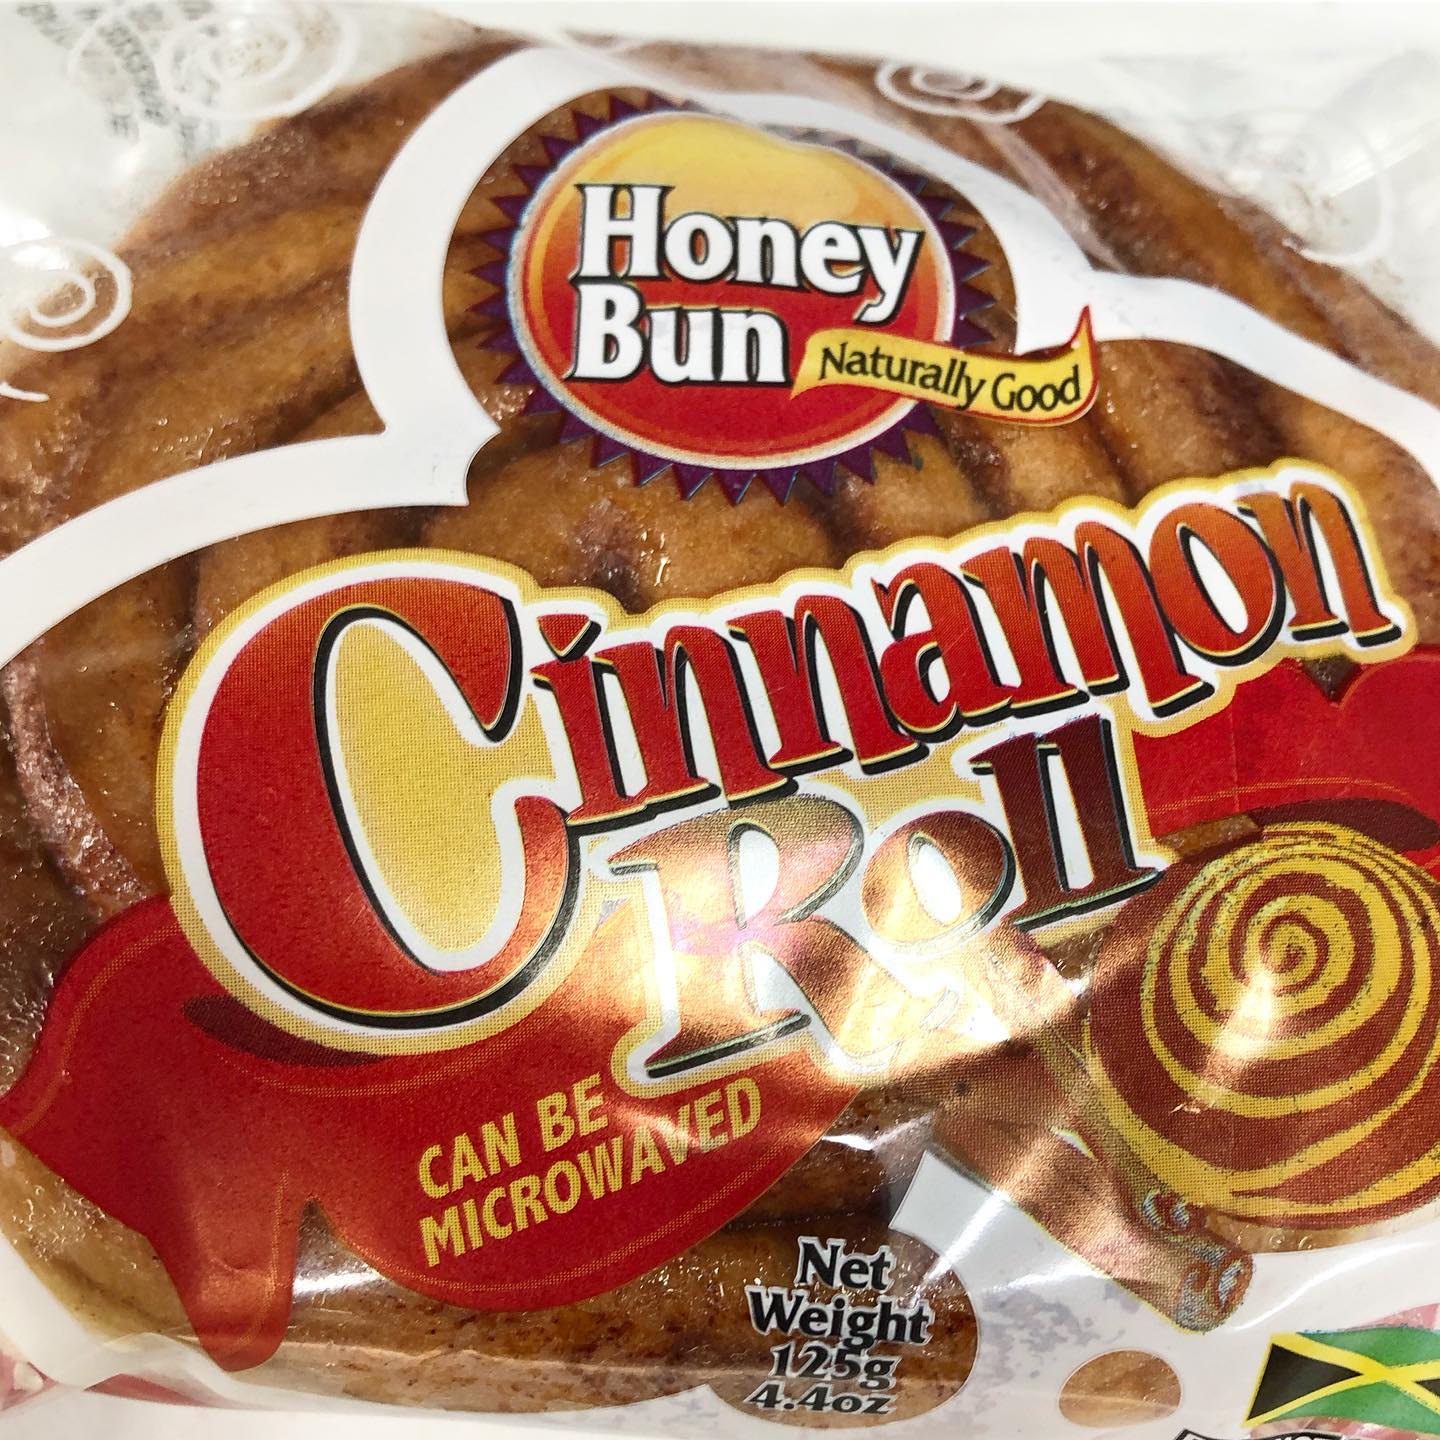 Picture of a honey bun